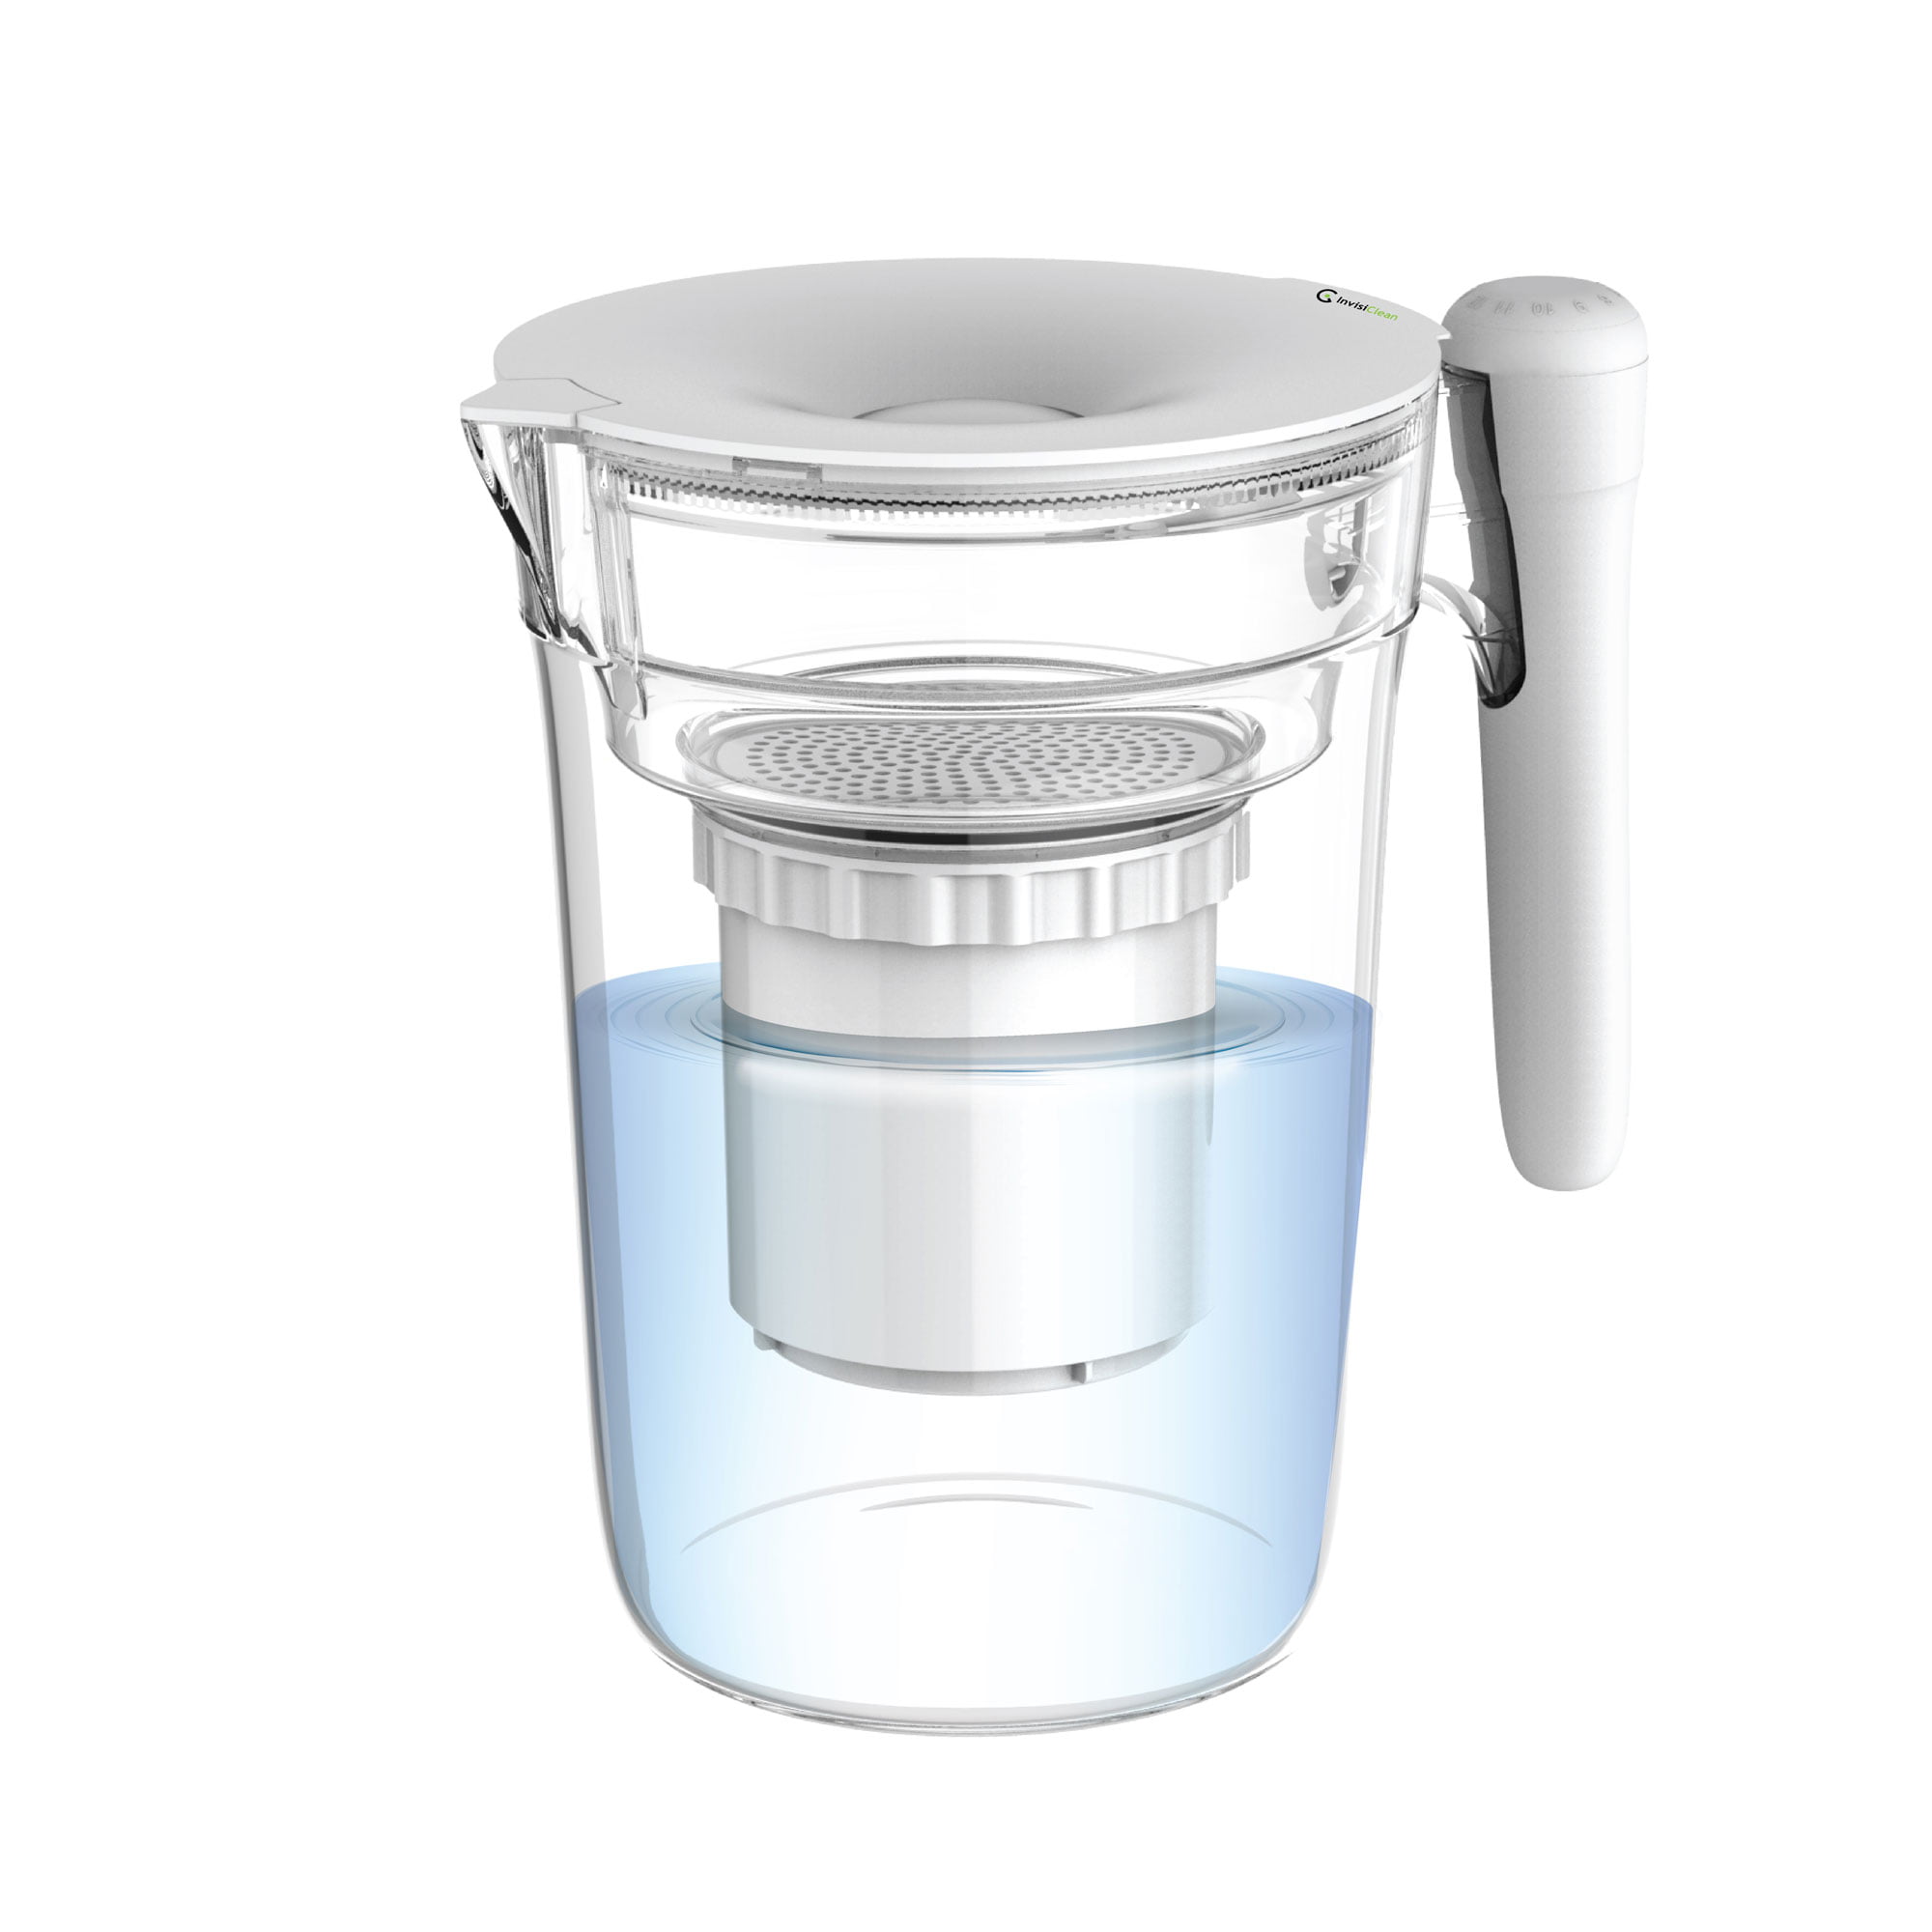 Zero 0 TDS Arsenic and More Lead BPA Free 8 Cups 5 Stage Filter Iron Fluoride Removes Chlorine InvisiClean Water Filter Pitcher Mercury